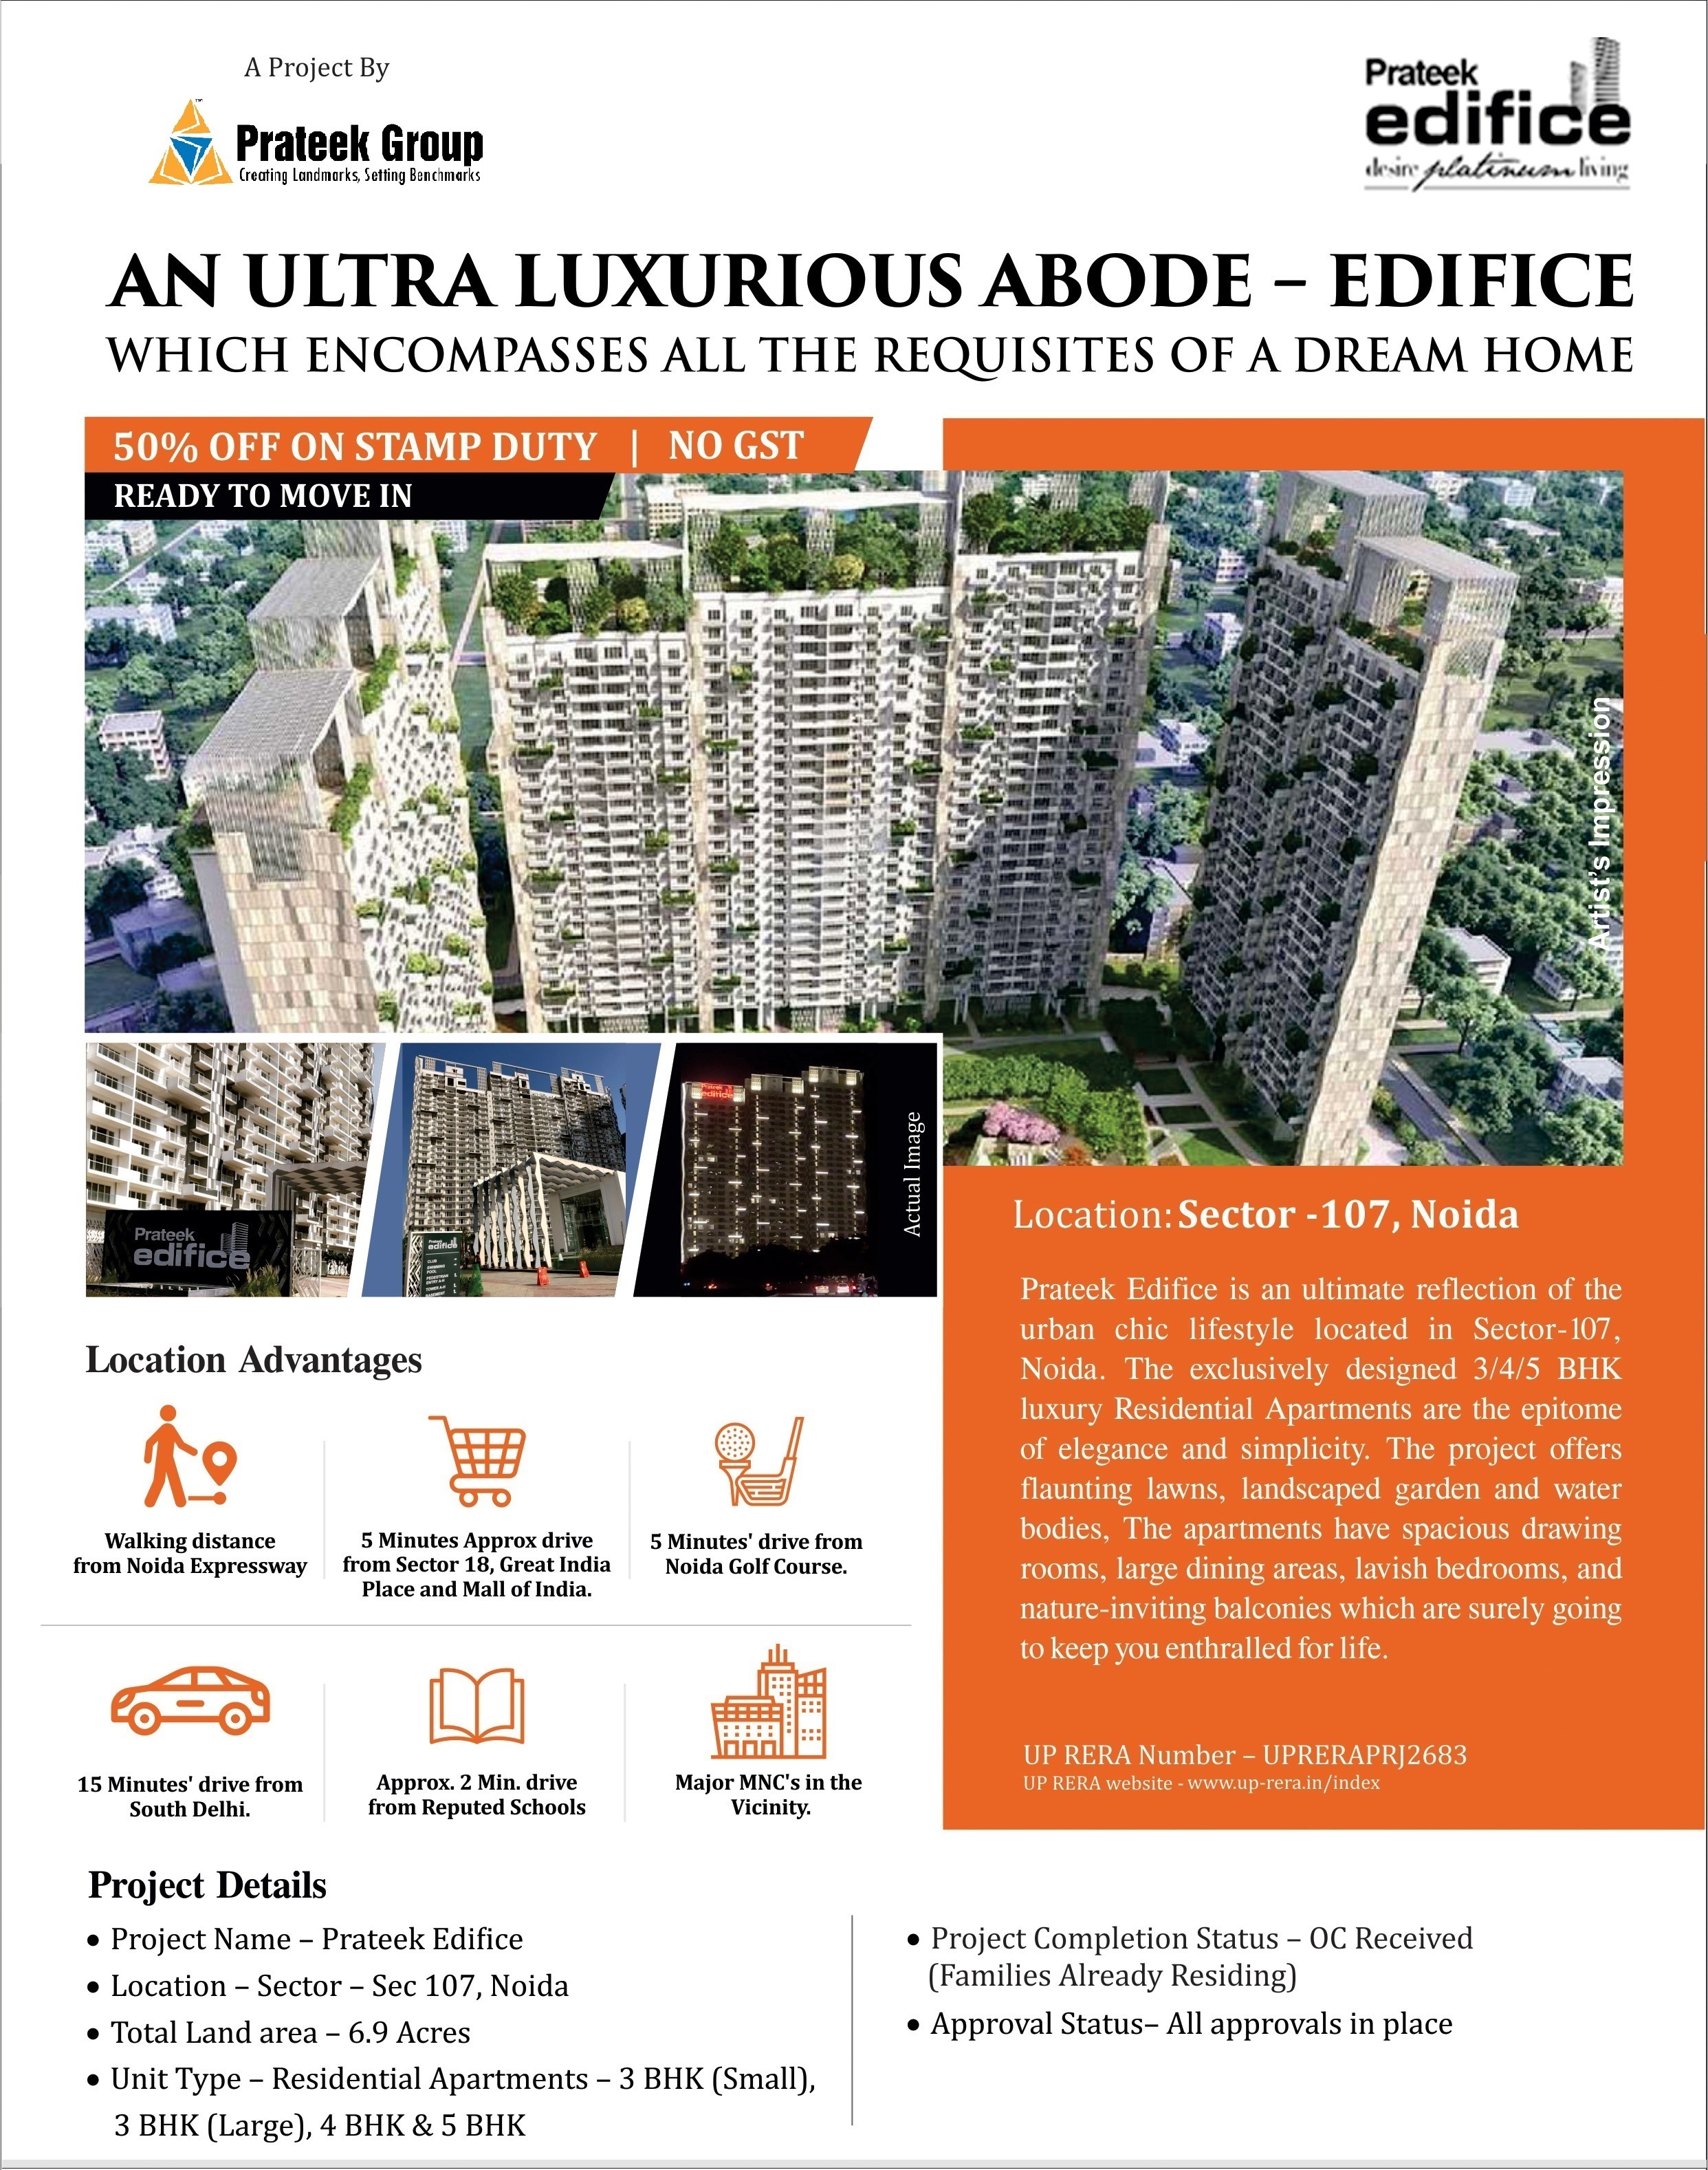 Ready to move in apartments with no GST at Prateek Edifice in Noida Update